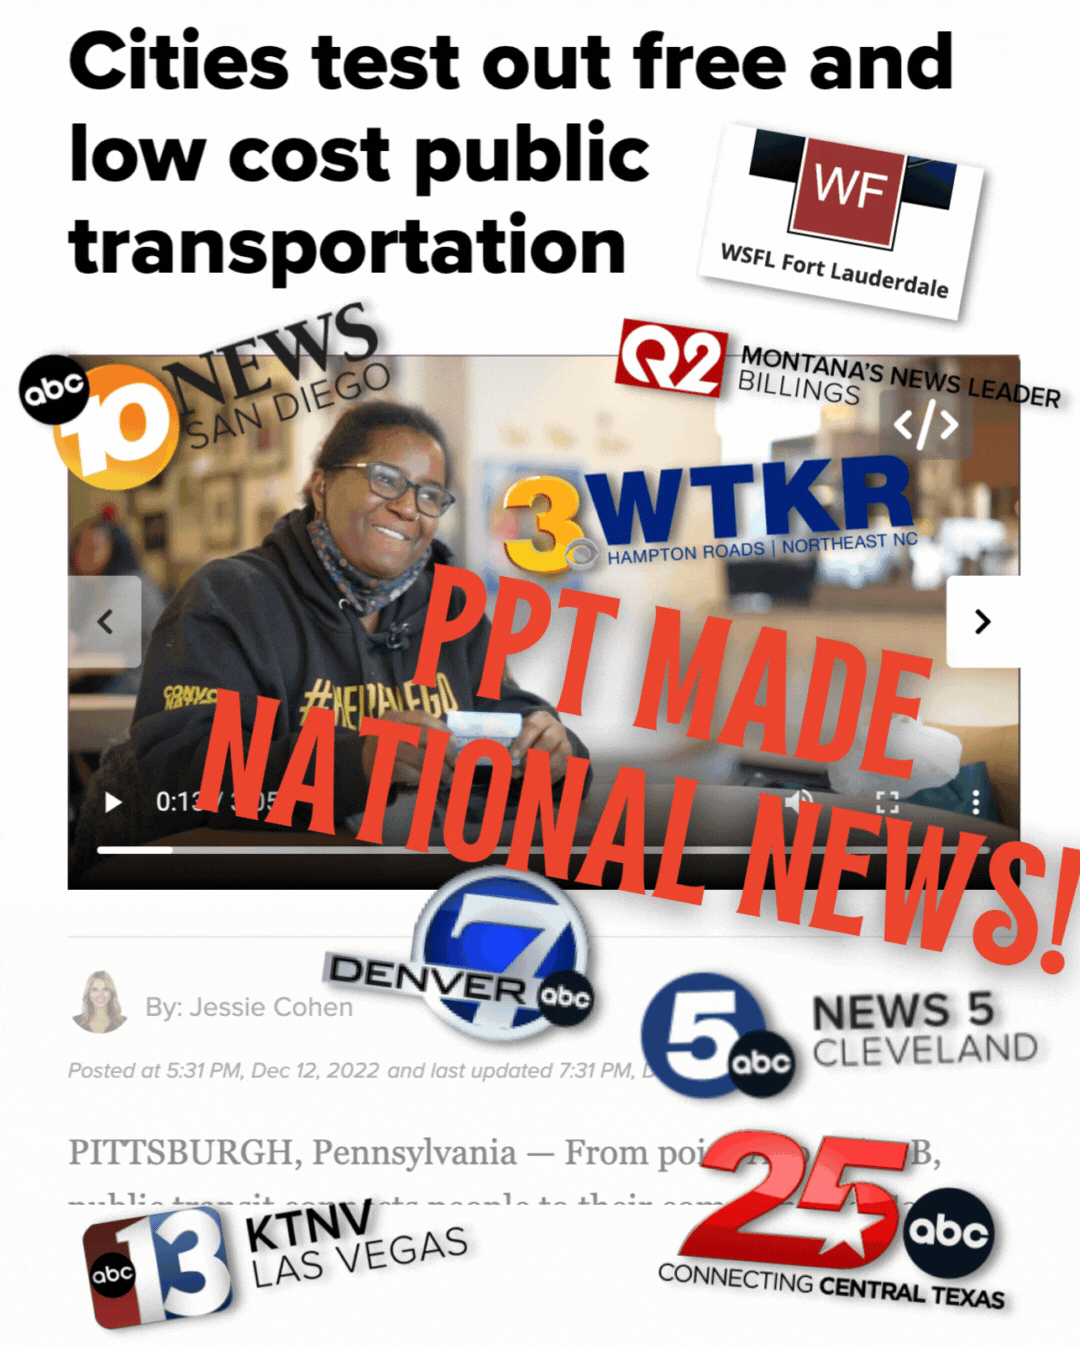 image description: a gif that includes a screenshot from KTNV Las Vegas Chanel 13’s website, has the headline “Cities test out free and low cost public transportation”. PPT Member Teaira Collins is smiling in the news story. A headline is added overtop that reads “PPT MADE NATIONAL NEWS!” and logos from 8 news networks are displayed including from ABC affiliates in San Diego, Denver, Las Vegas, Cleveland, North Carolina, Montana, and Texas.